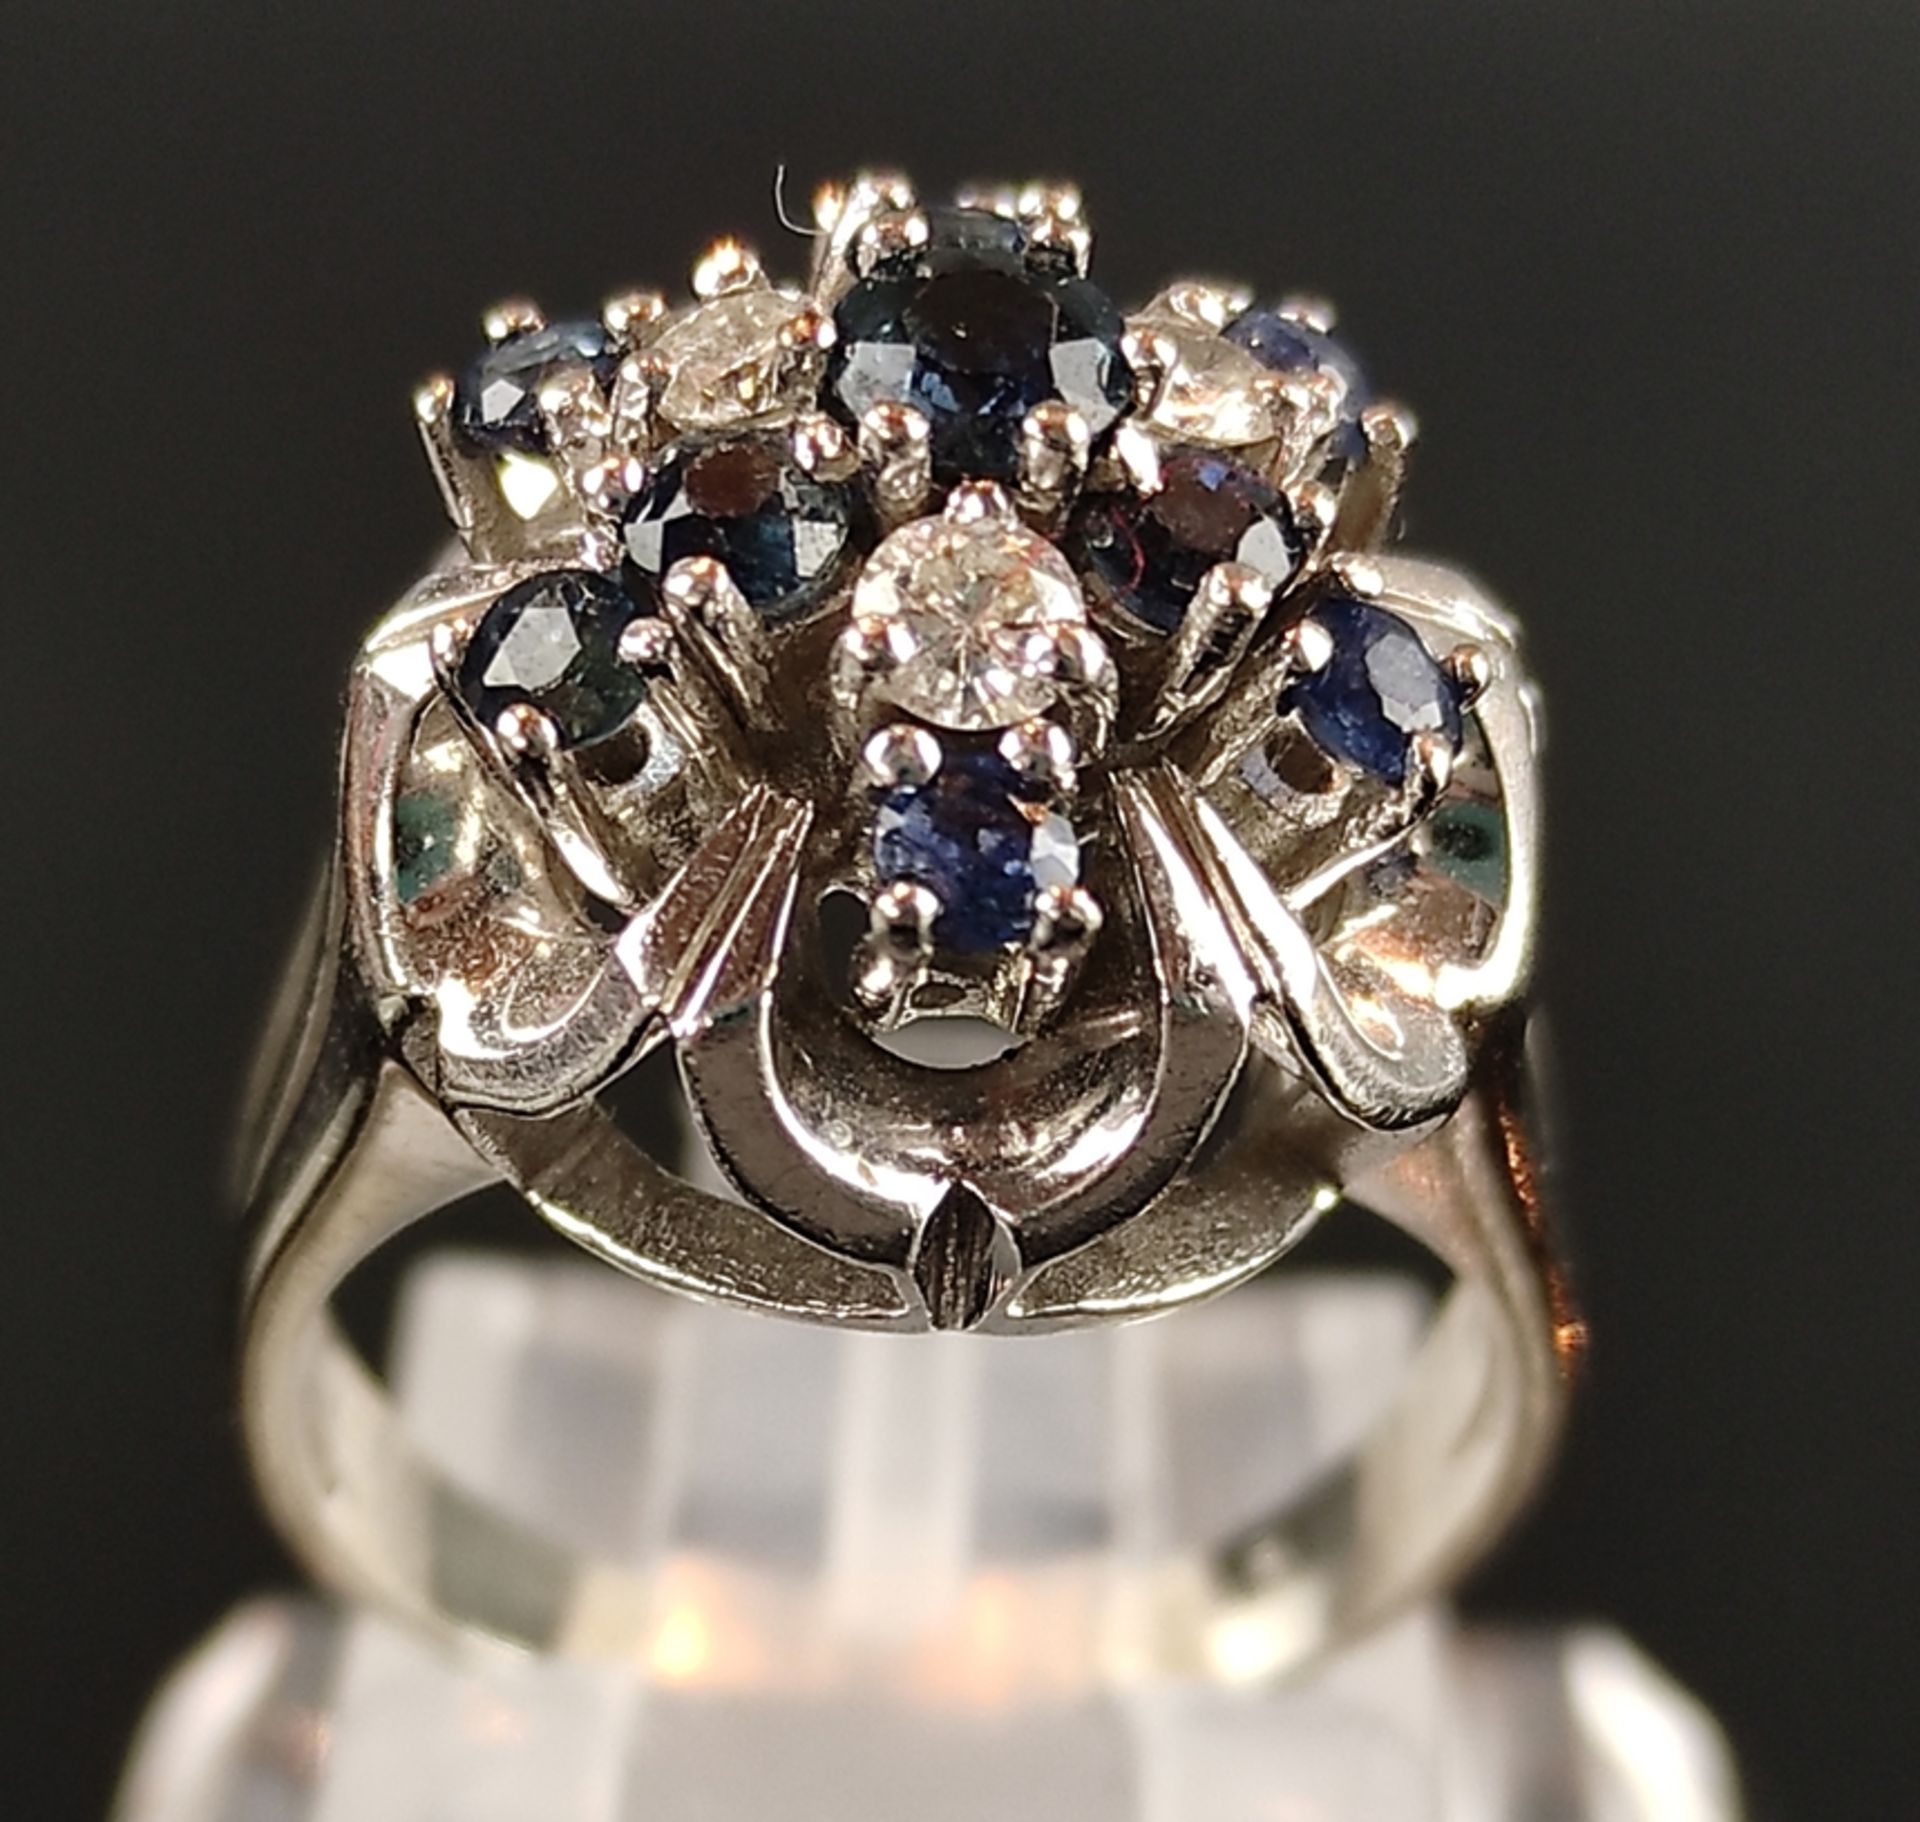 Diamond-sapphire-ring, with 10 sapphires and 3 diamonds, 585/14K white gold, 6.3g, size 48.5 - Image 3 of 5